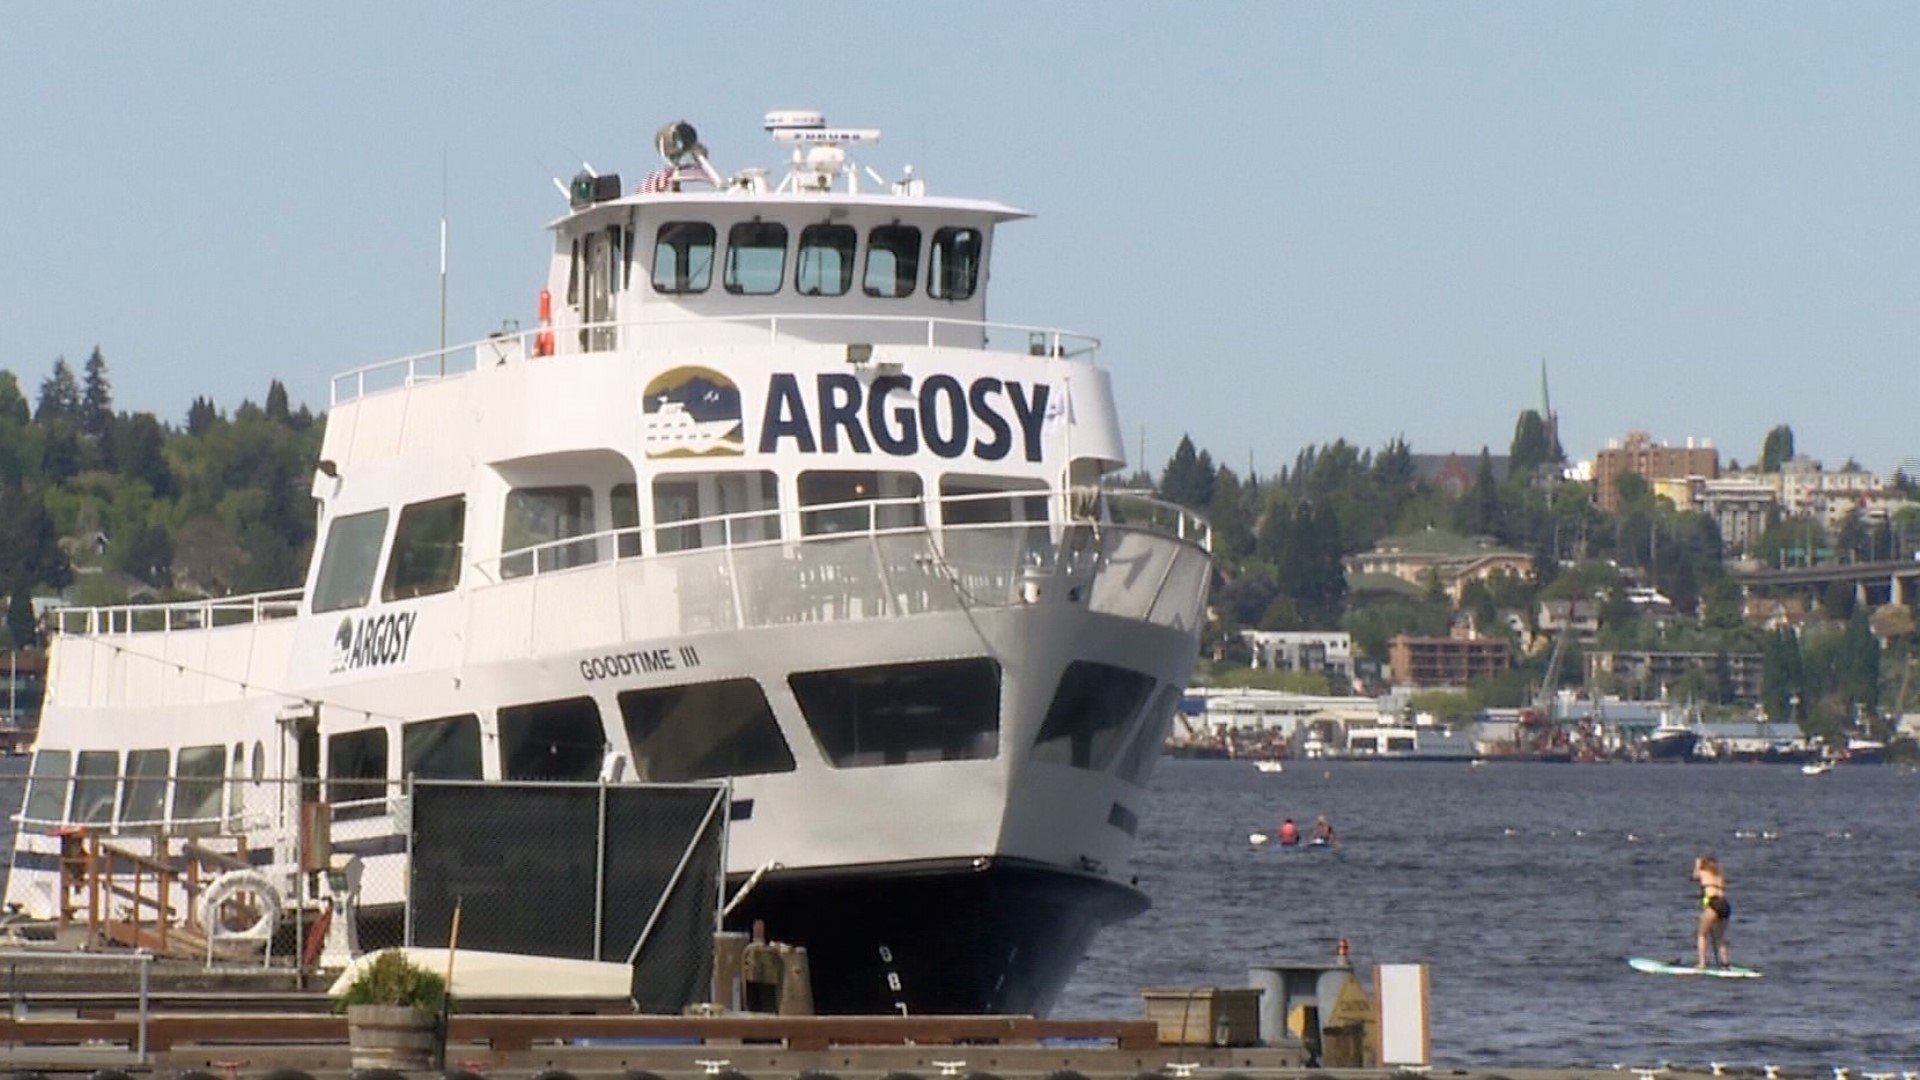 The Locks Tour allows passengers to explore more of Seattle. Sponsored by Argosy Cruises